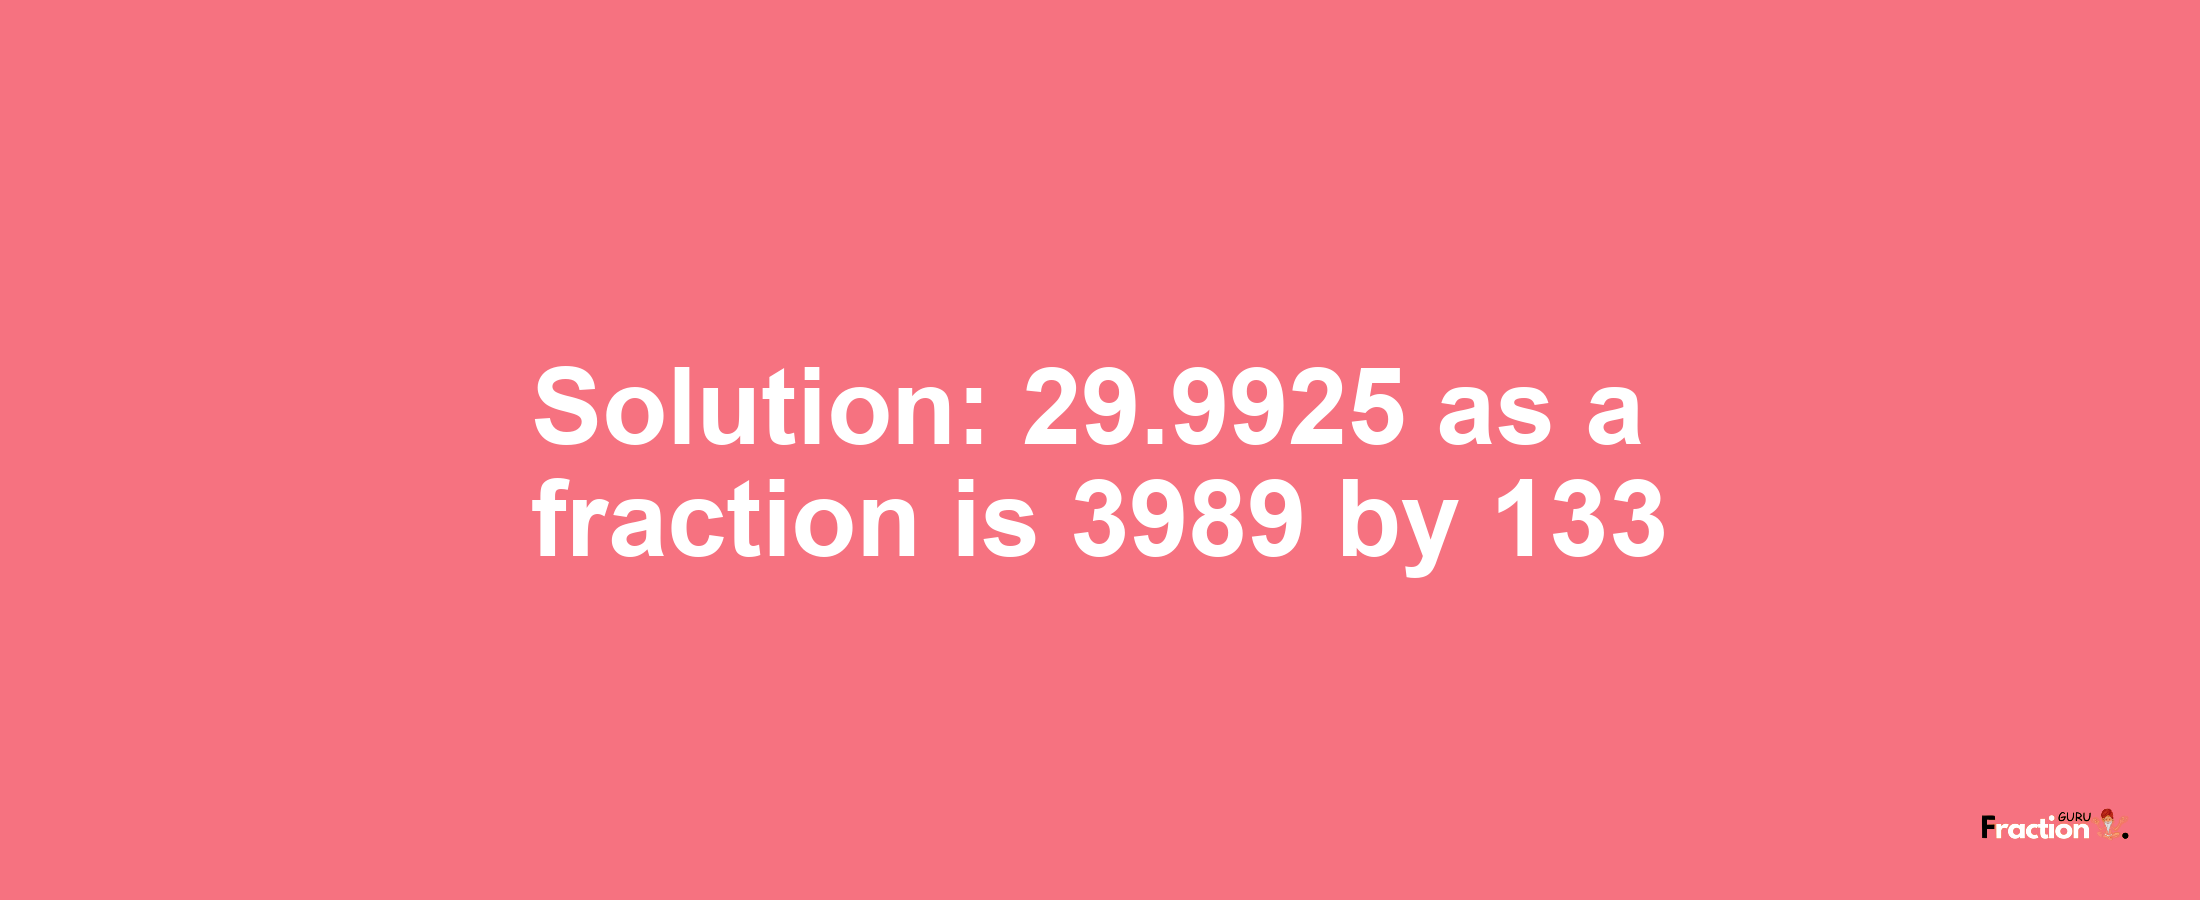 Solution:29.9925 as a fraction is 3989/133